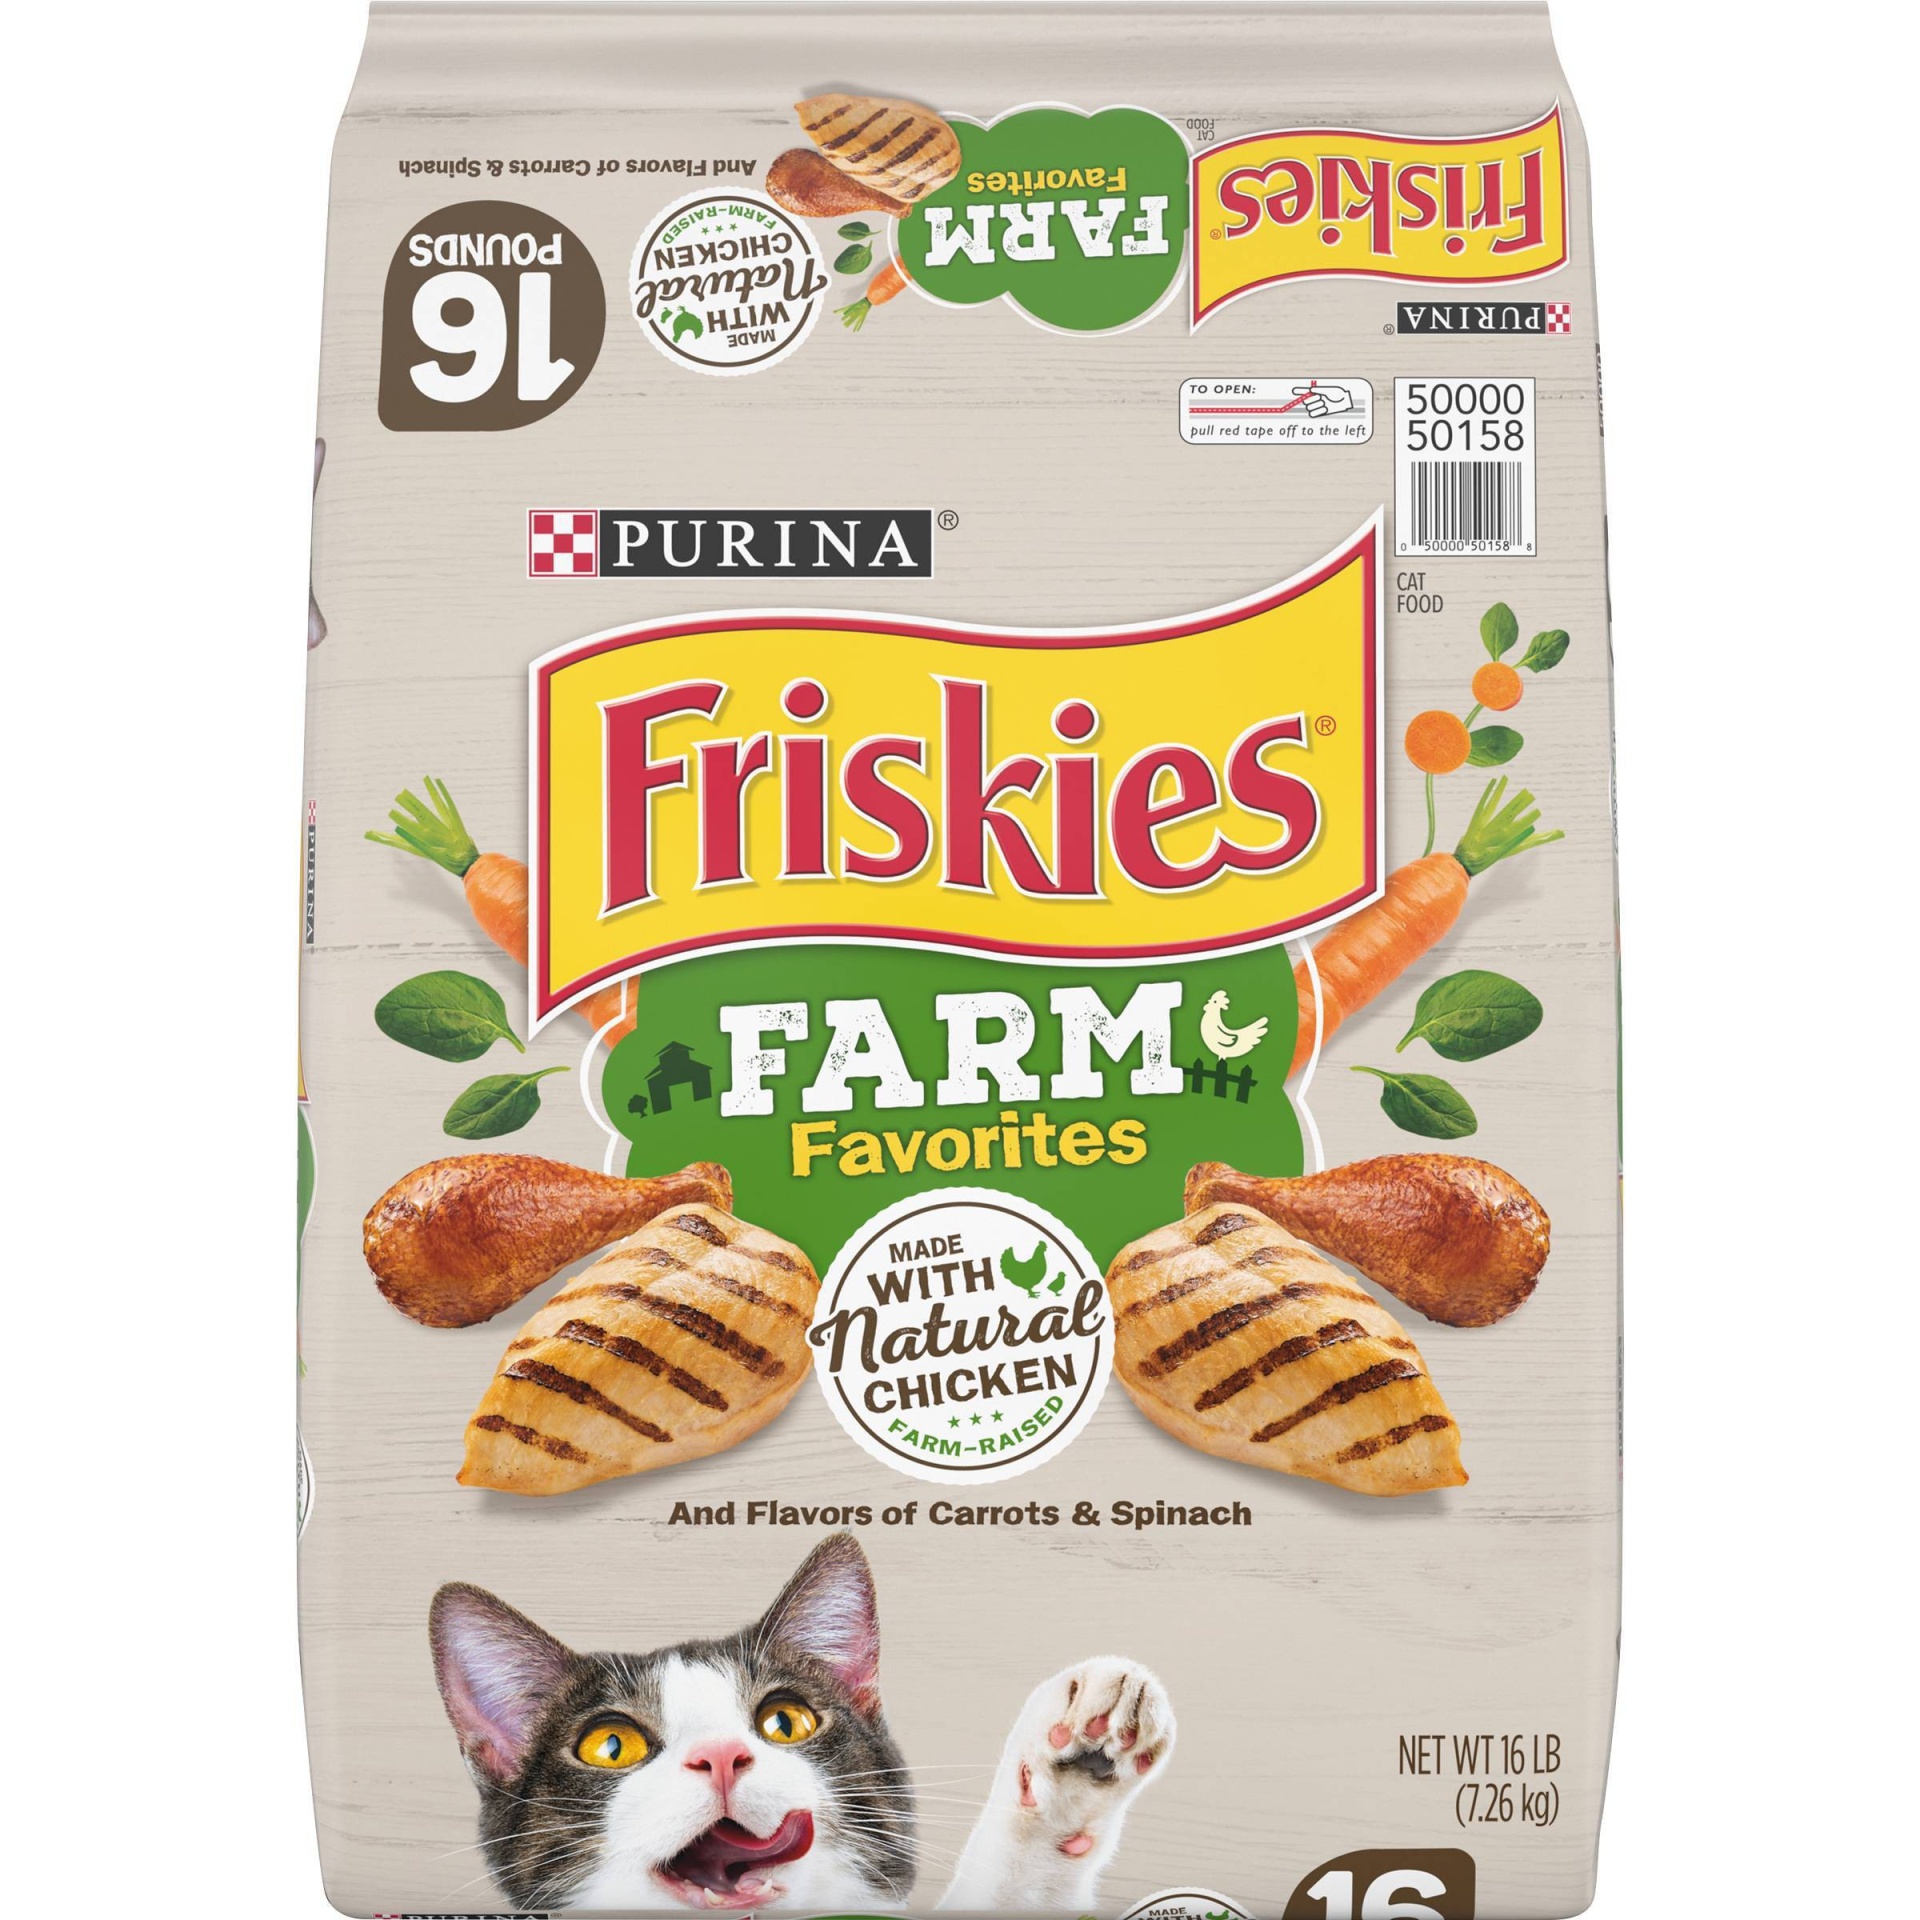 slide 1 of 5, Purina Friskies Farm Favorites with Natural Chicken & Flavors of Carrots&Spinach Adult Complete & Balanced Dry Cat Food - 16.25lbs, 16 lb